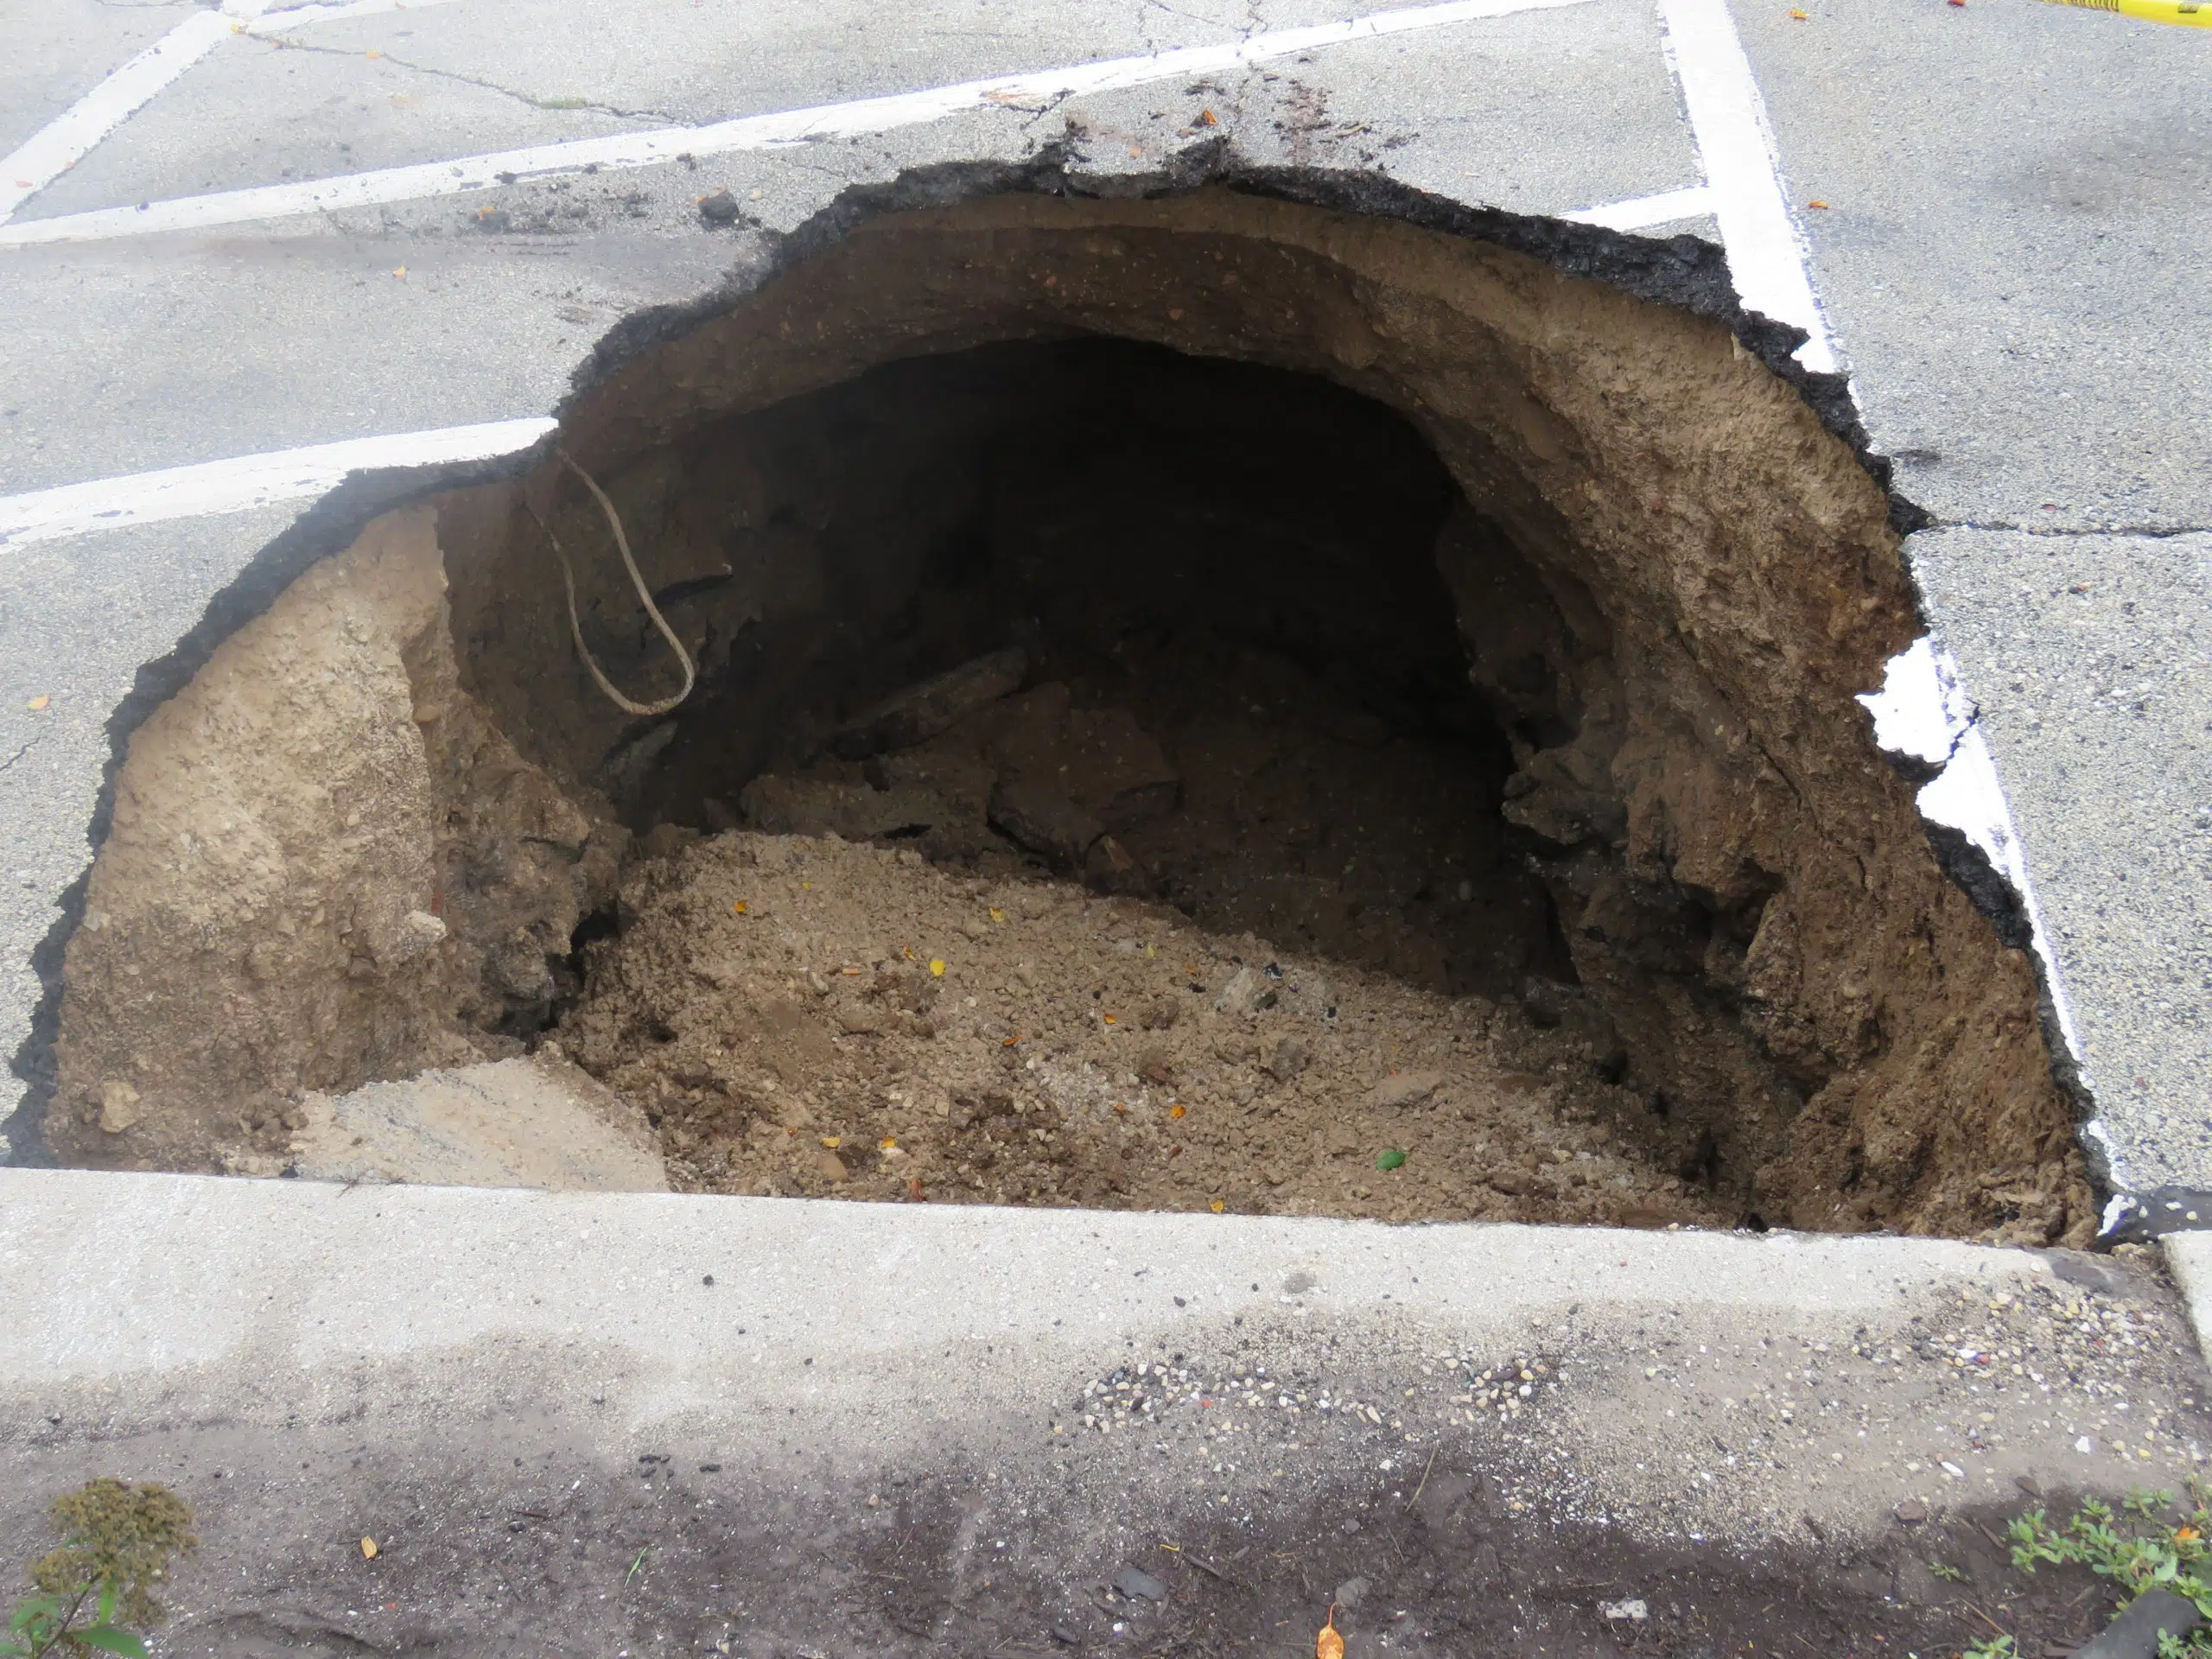 Parking Lot Will Close Next Week To Repair Collapsed Storm Sewer Pipe